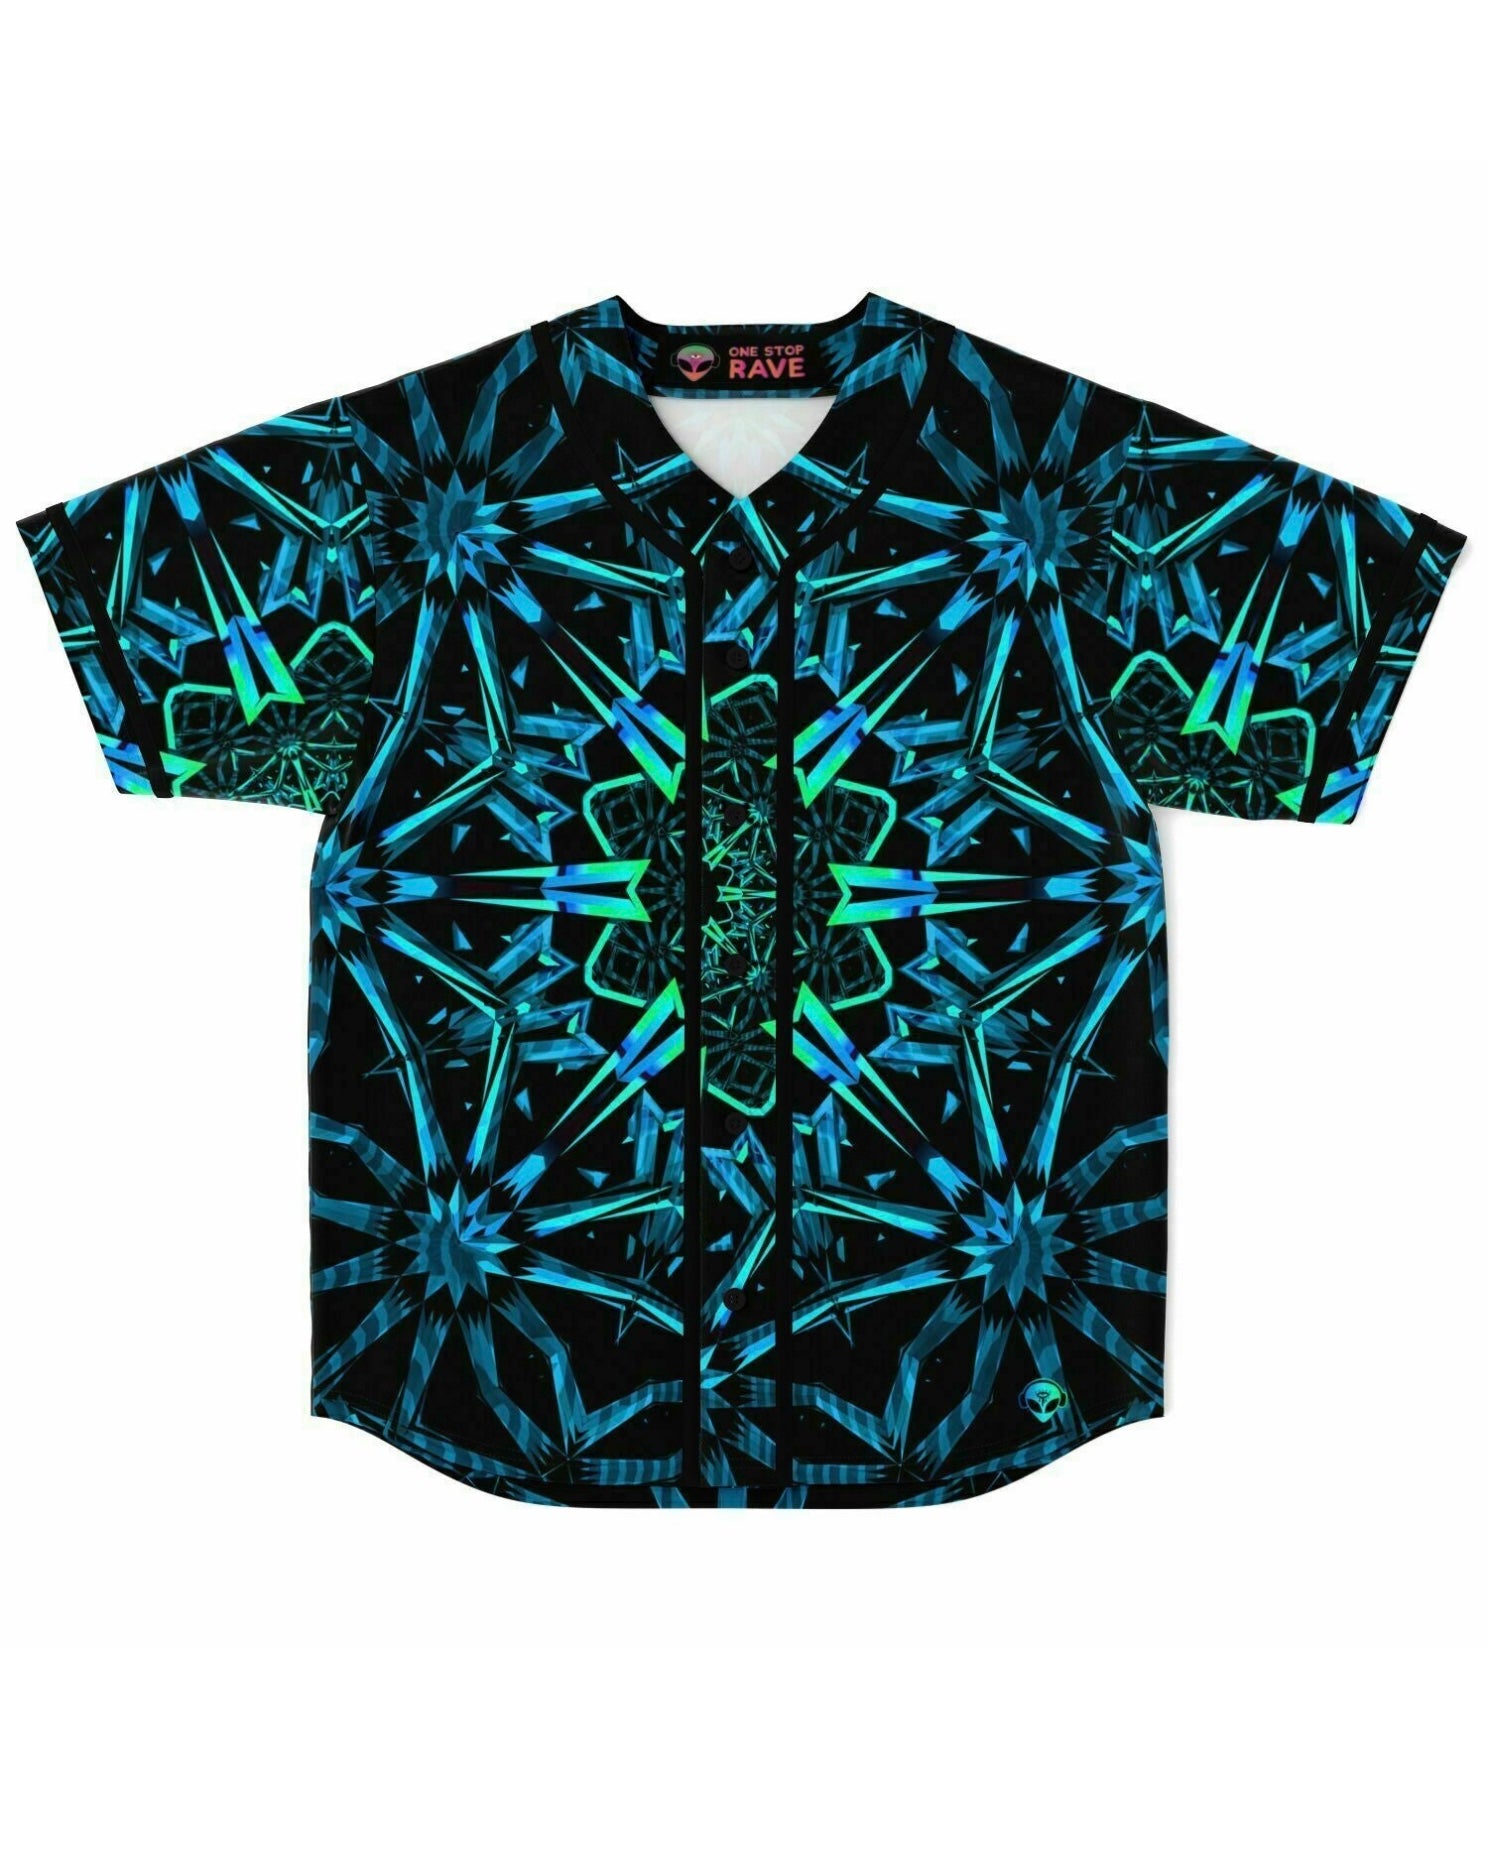 Fractals Baseball Jersey showcasing the mesmerizing blue and green gradient fractal design